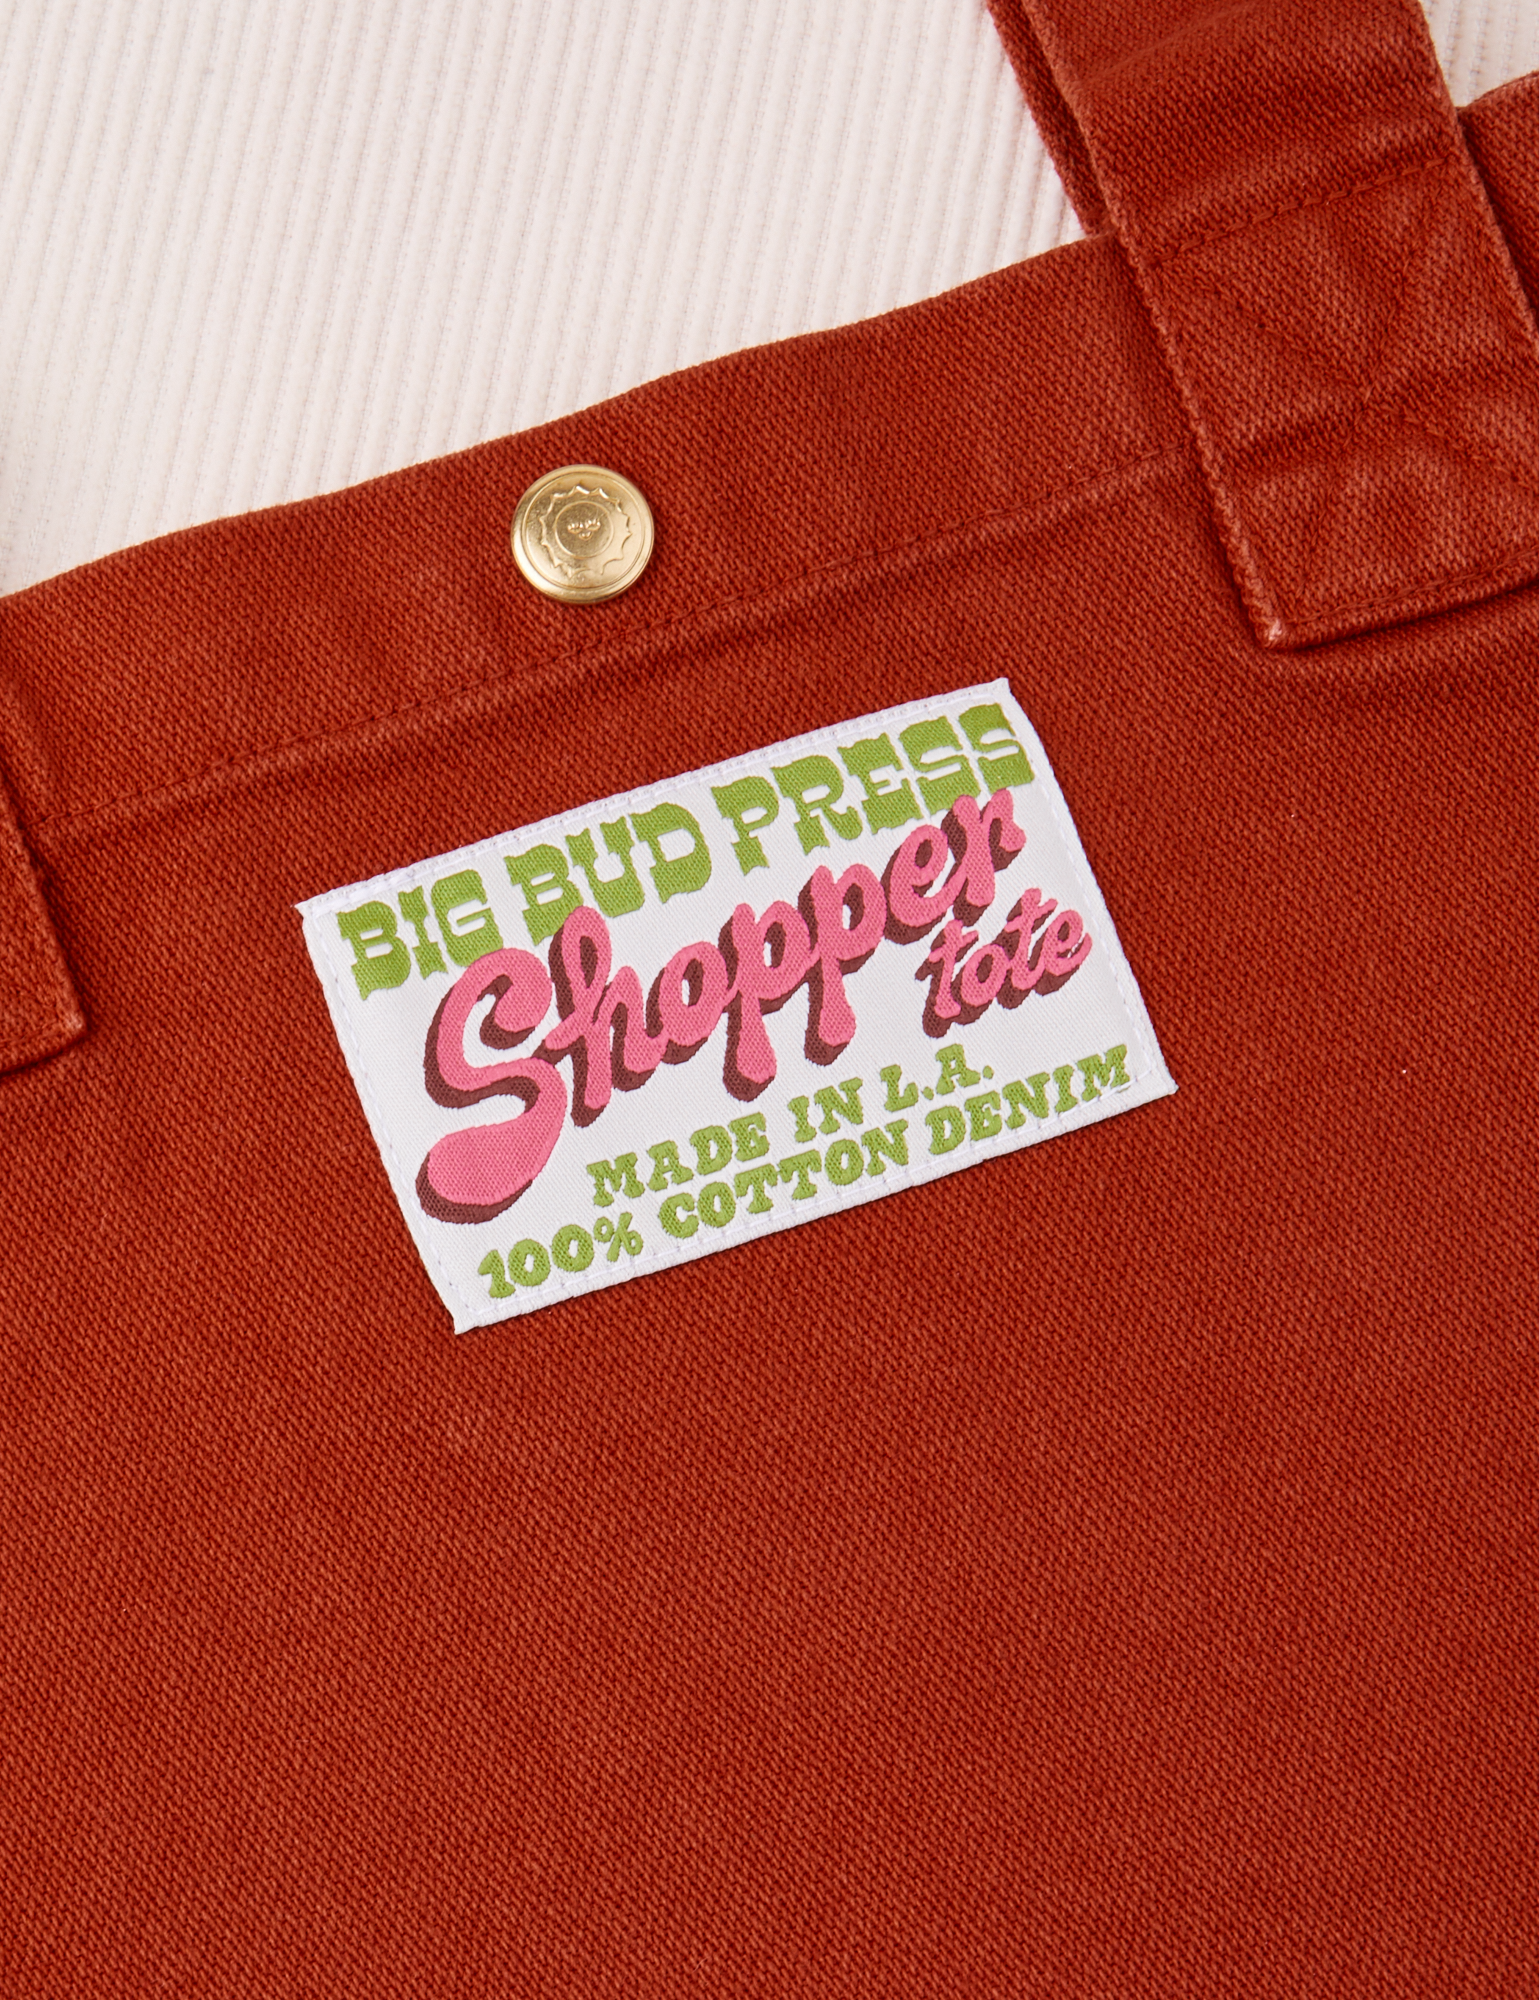 Close up of brass sun baby snap on paprika Shopper Tote Bag. Bag label with green and pink text that reads &quot;Big Bud Press, Shopper Tote, Made in L.A. 100% Cotton Denim&quot; on a white background